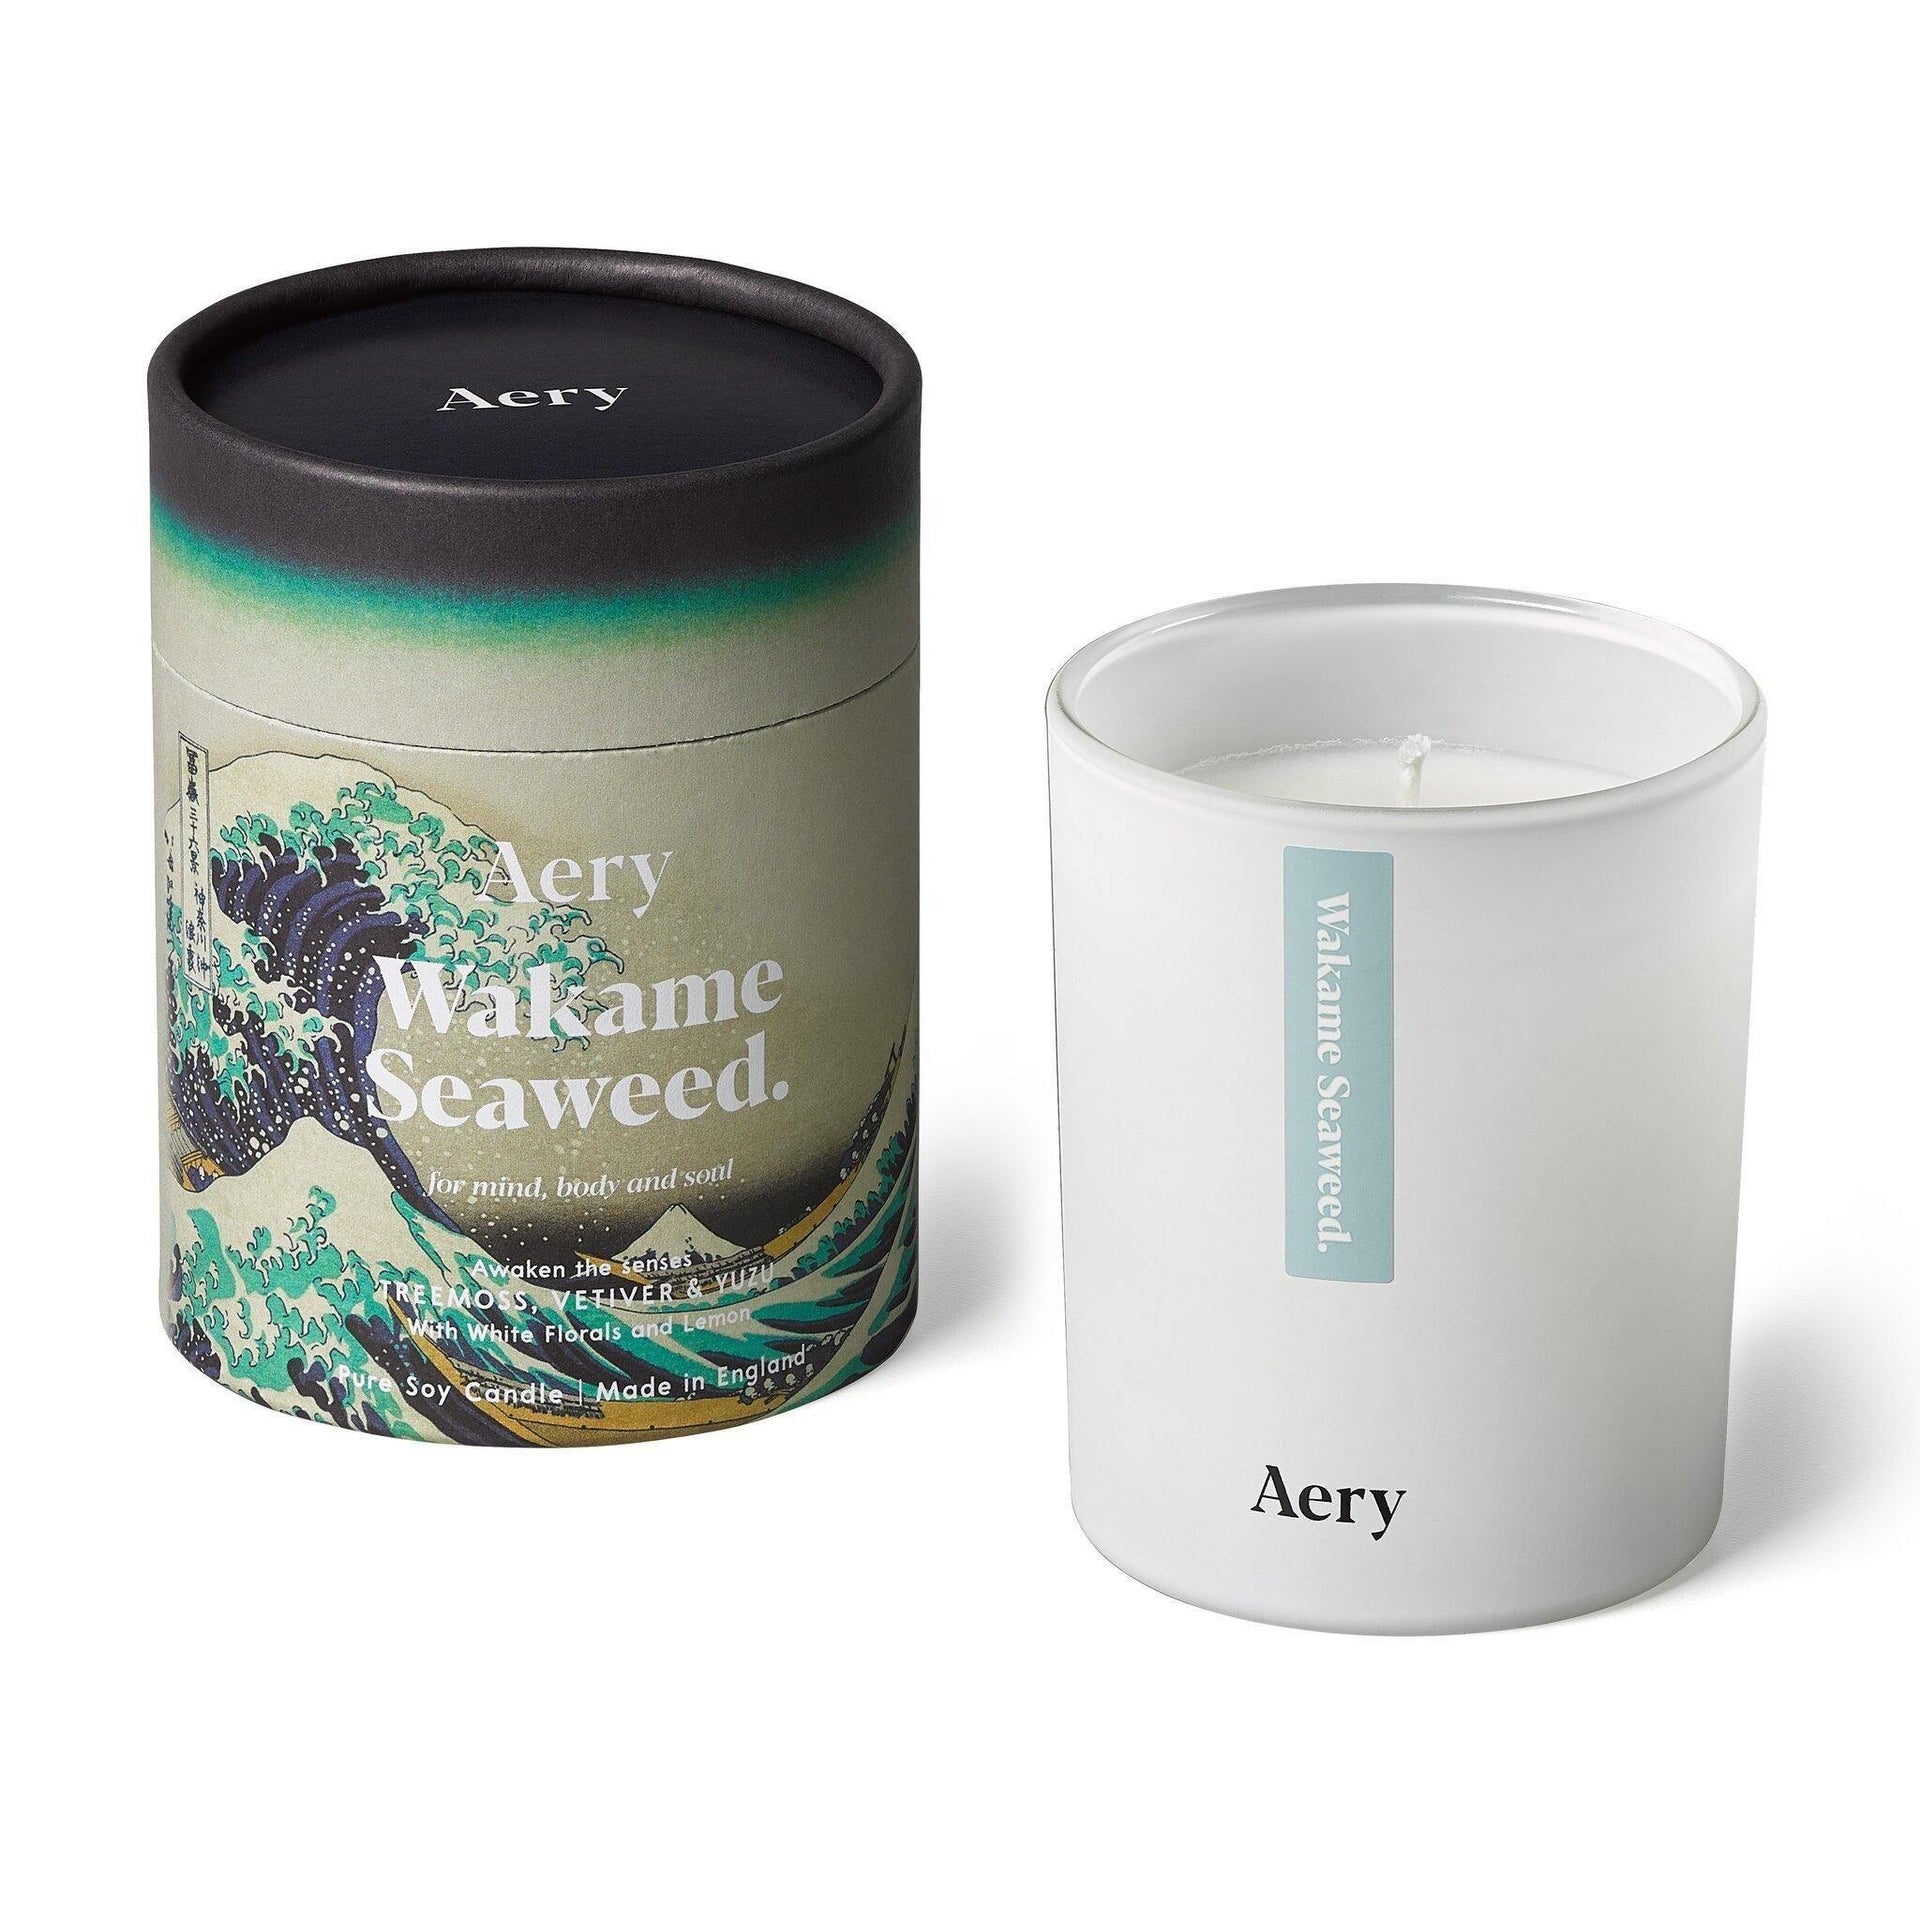 Aery Living Tokyo 200g Soy Candle-Wakame Seaweed  | Scented Candles | Candle Fragrances | Soy Candles | Newcastle Candles | Best Candles | Nice Candles | Gifts | Best Gifts | Wax Candles | Mothers Day Gifts | Christmas Gifts | Candles Australia | Candle Shop | Presents | Sydney Candles | Brisbane Candles | Townsville Candles | Melbourne Candles | Perth Candles | Soy Wax | Accepts Bitcoin | Candles Online | Accepts Crypto currency | Upcycle Studio